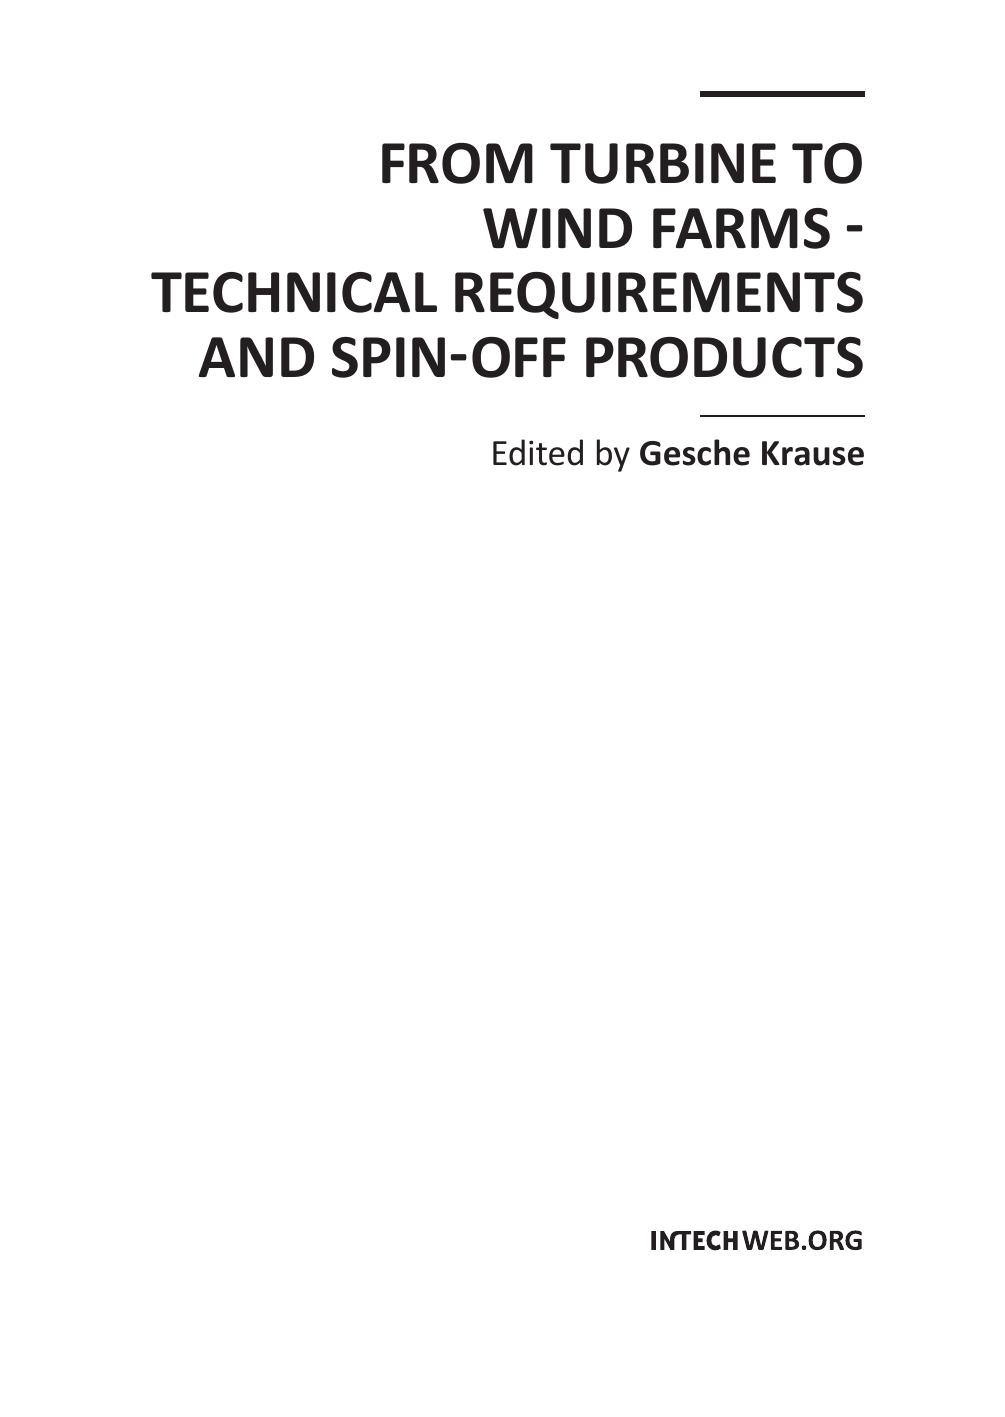 From Turbine to Wind Farms - Technical Requirements and Spin-Off Products.indd